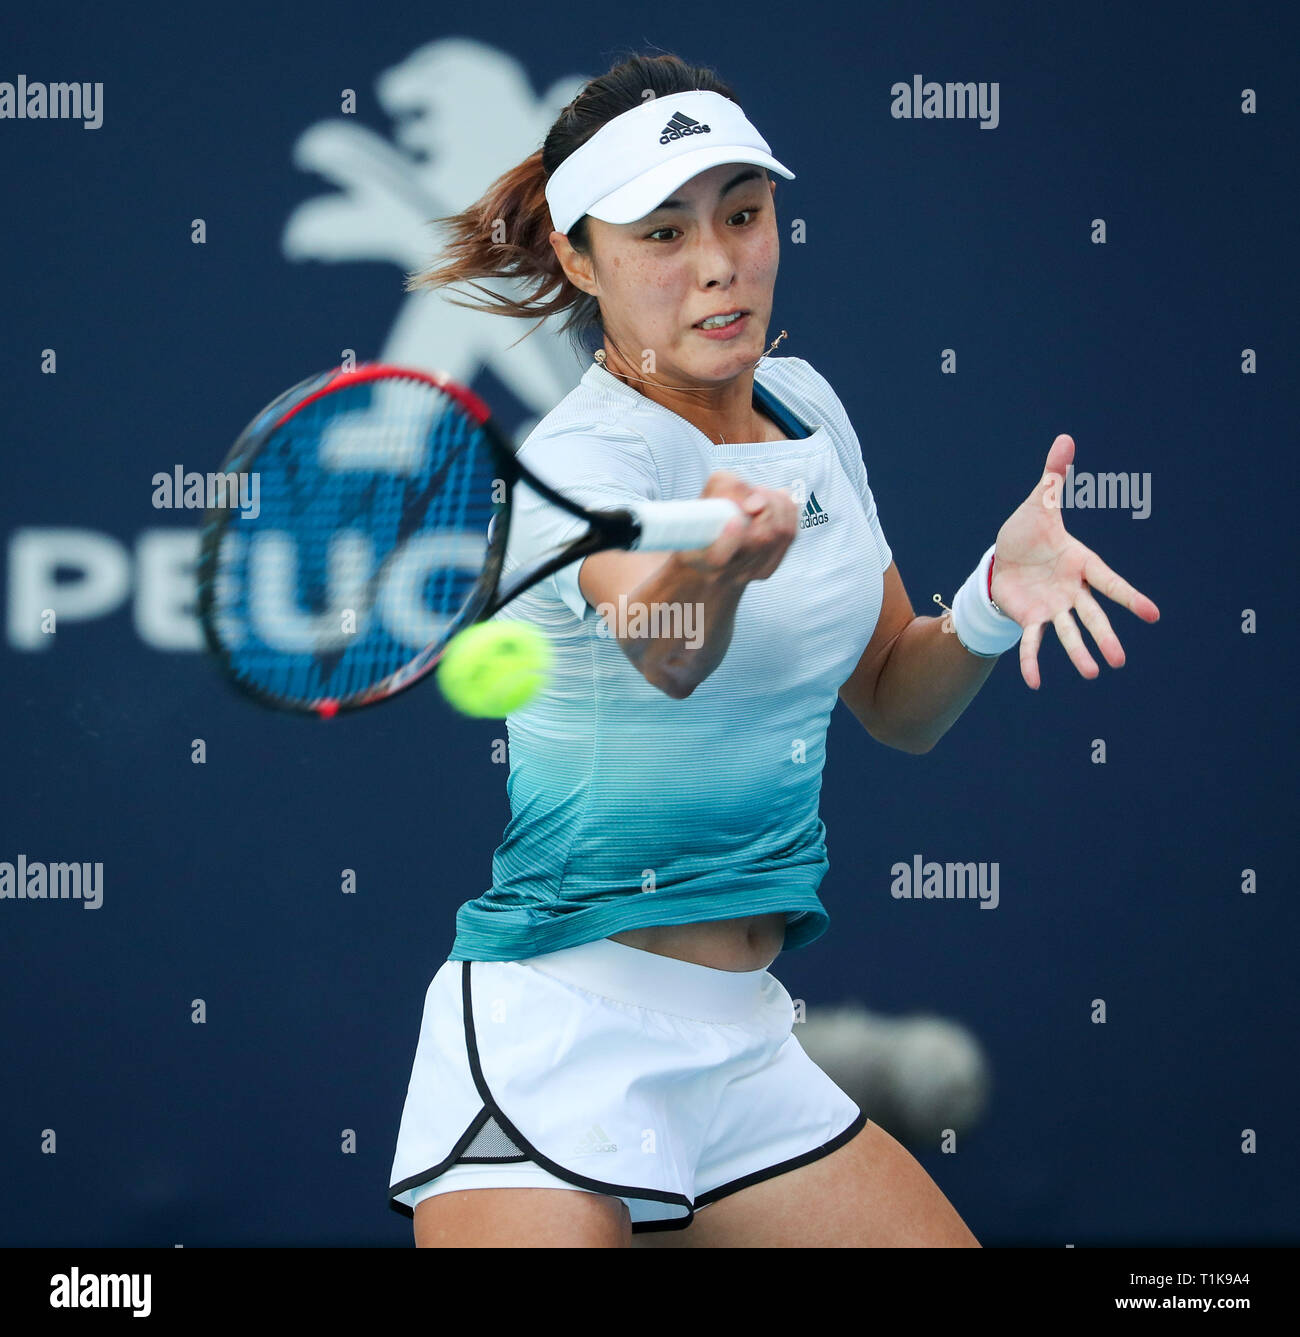 Miami Gardens, Florida, USA. 27th Mar, 2019. Qiang Wang, of China, returns a shot to Simona Halep, of Romania, during a quarter-finals match at the 2019 Miami Open Presented by Itau professional tennis tournament, played at the Hardrock Stadium in Miami Gardens, Florida, USA. Mario Houben/CSM/Alamy Live News Stock Photo